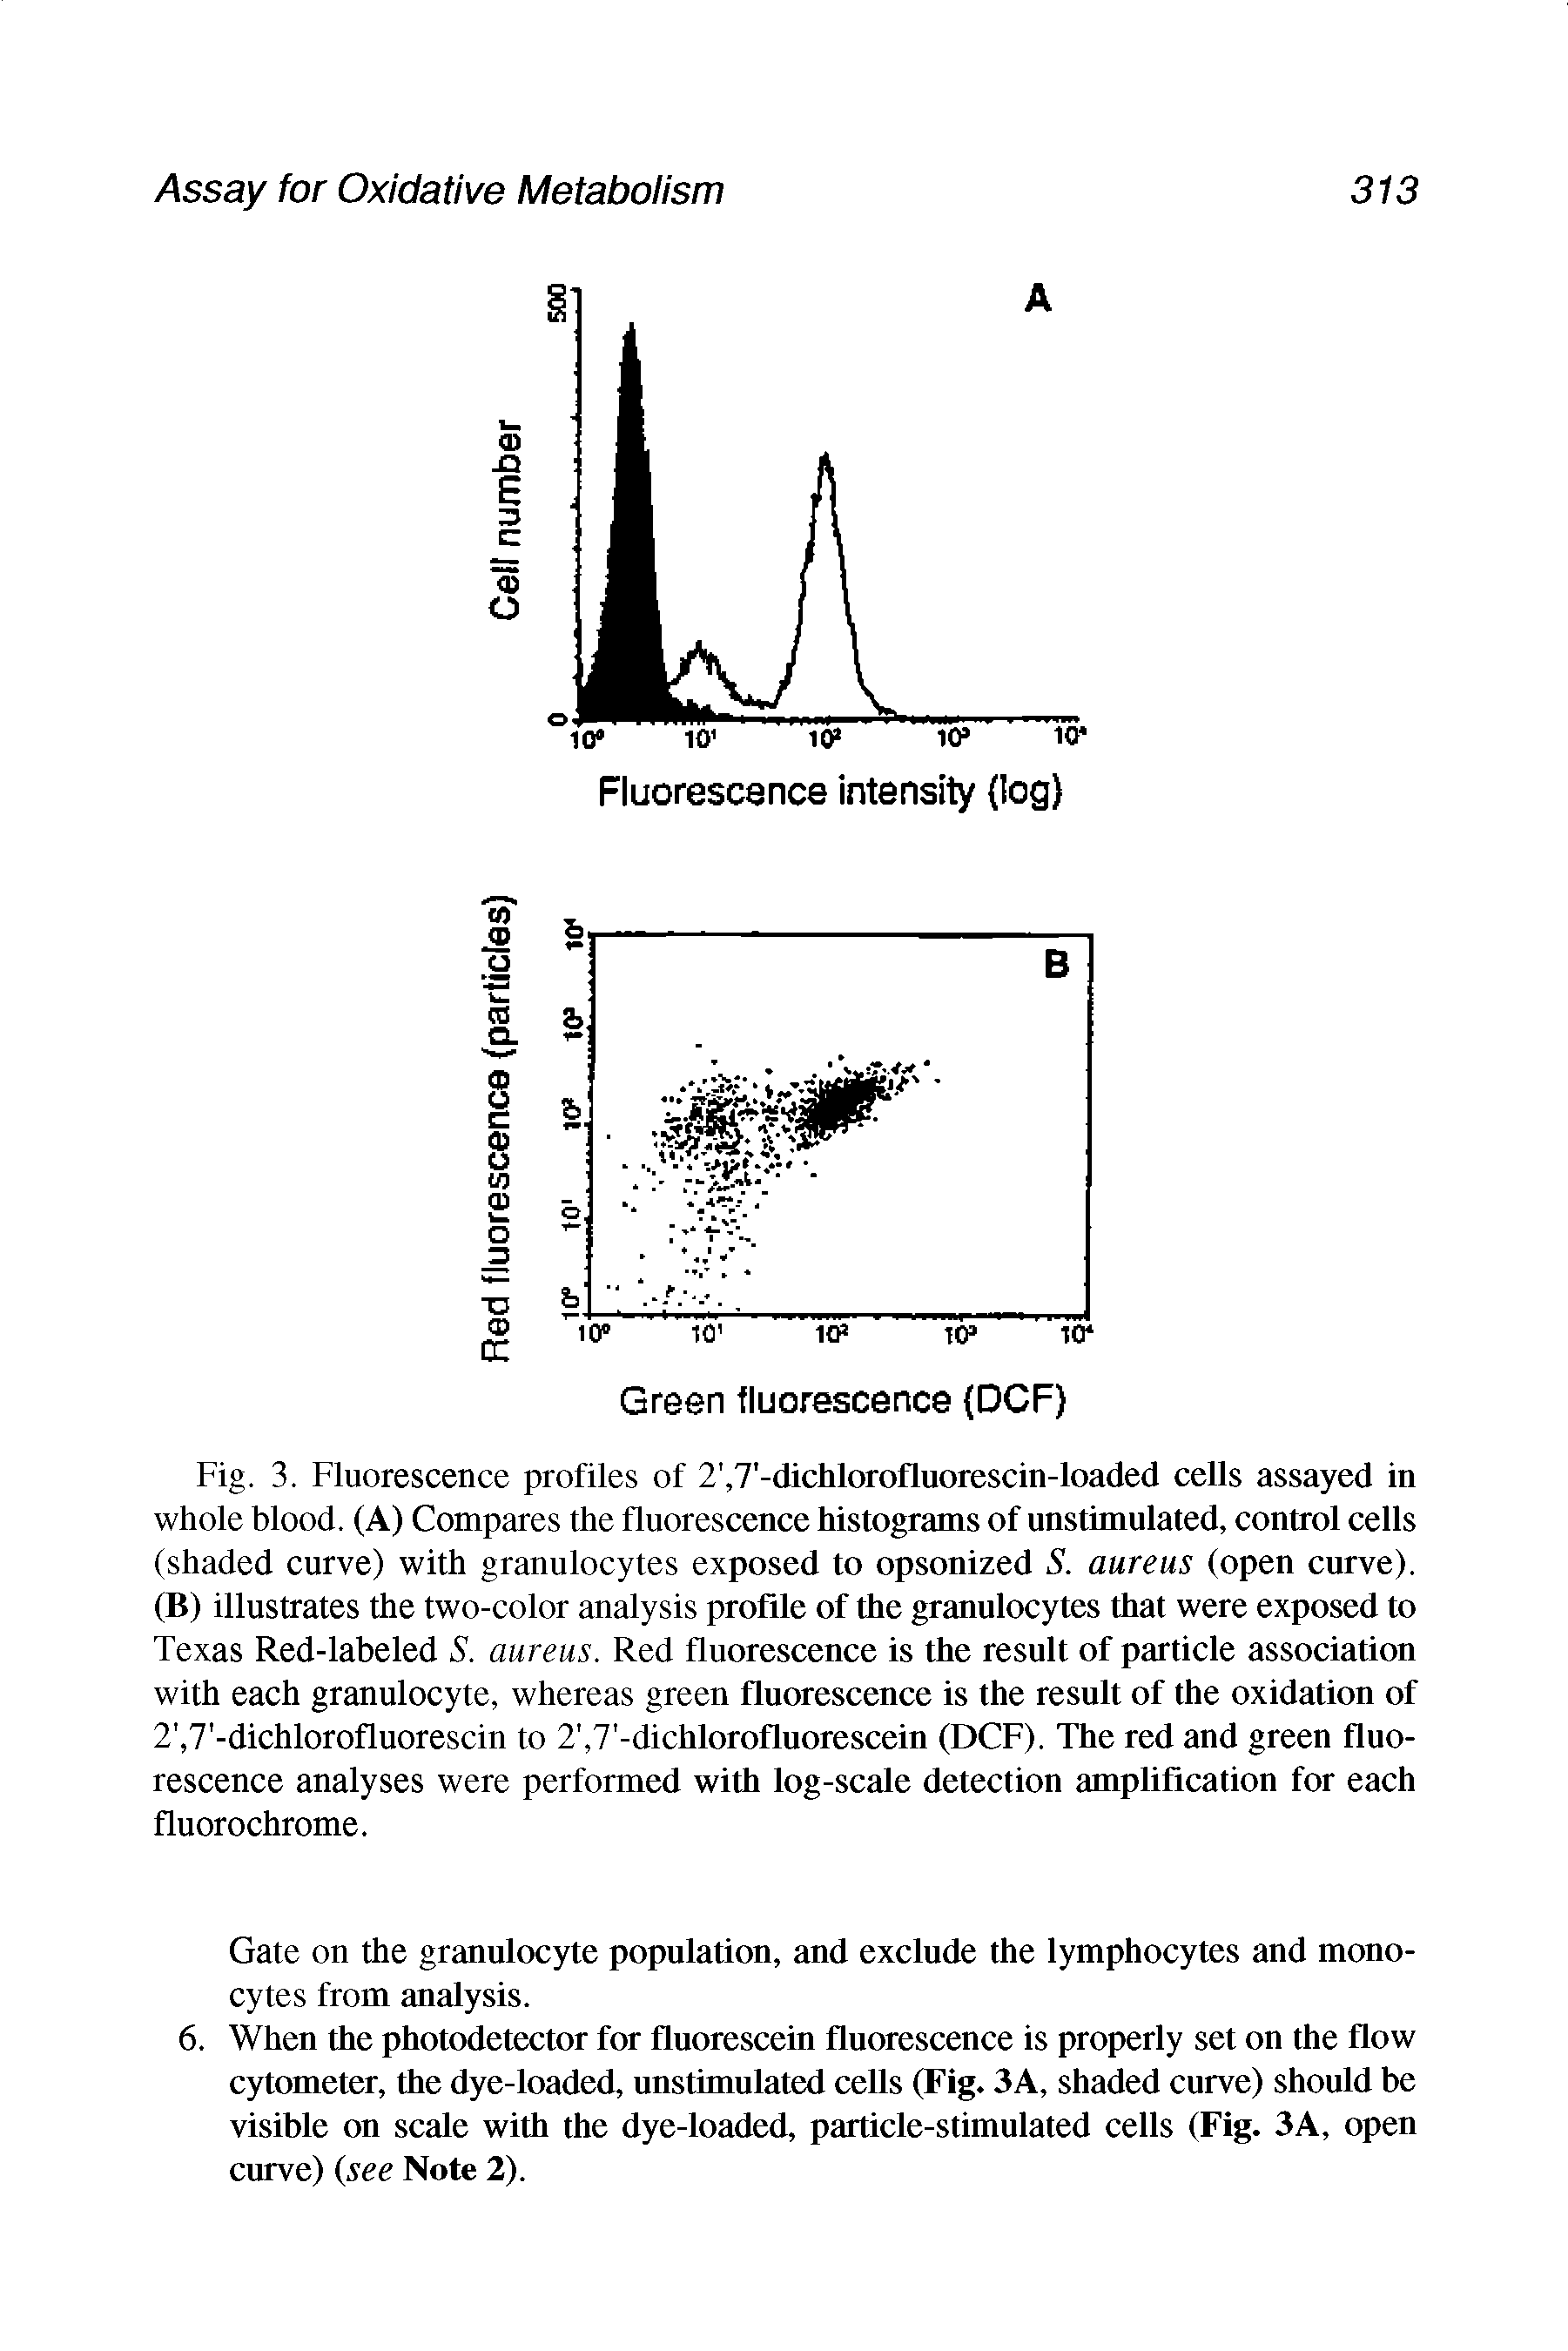 Fig. 3. Fluorescence profiles of 2, 7 -dichlorofluorescin-loaded cells assayed in whole blood. (A) Compares the fluorescence histograms of unstimulated, control cells (shaded curve) with granulocytes exposed to opsonized S. aureus (open curve). (B) illustrates the two-color analysis profde of the granulocytes that were exposed to Texas Red-labeled S. aureus. Red fluorescence is the result of particle association with each granulocyte, whereas green fluorescence is the result of the oxidation of 2, 7 -dichlorofluorescin to 2, 7 -dichlorofluorescein (DCF). The red and green fluorescence analyses were performed with log-scale detection amplification for each fluorochrome.